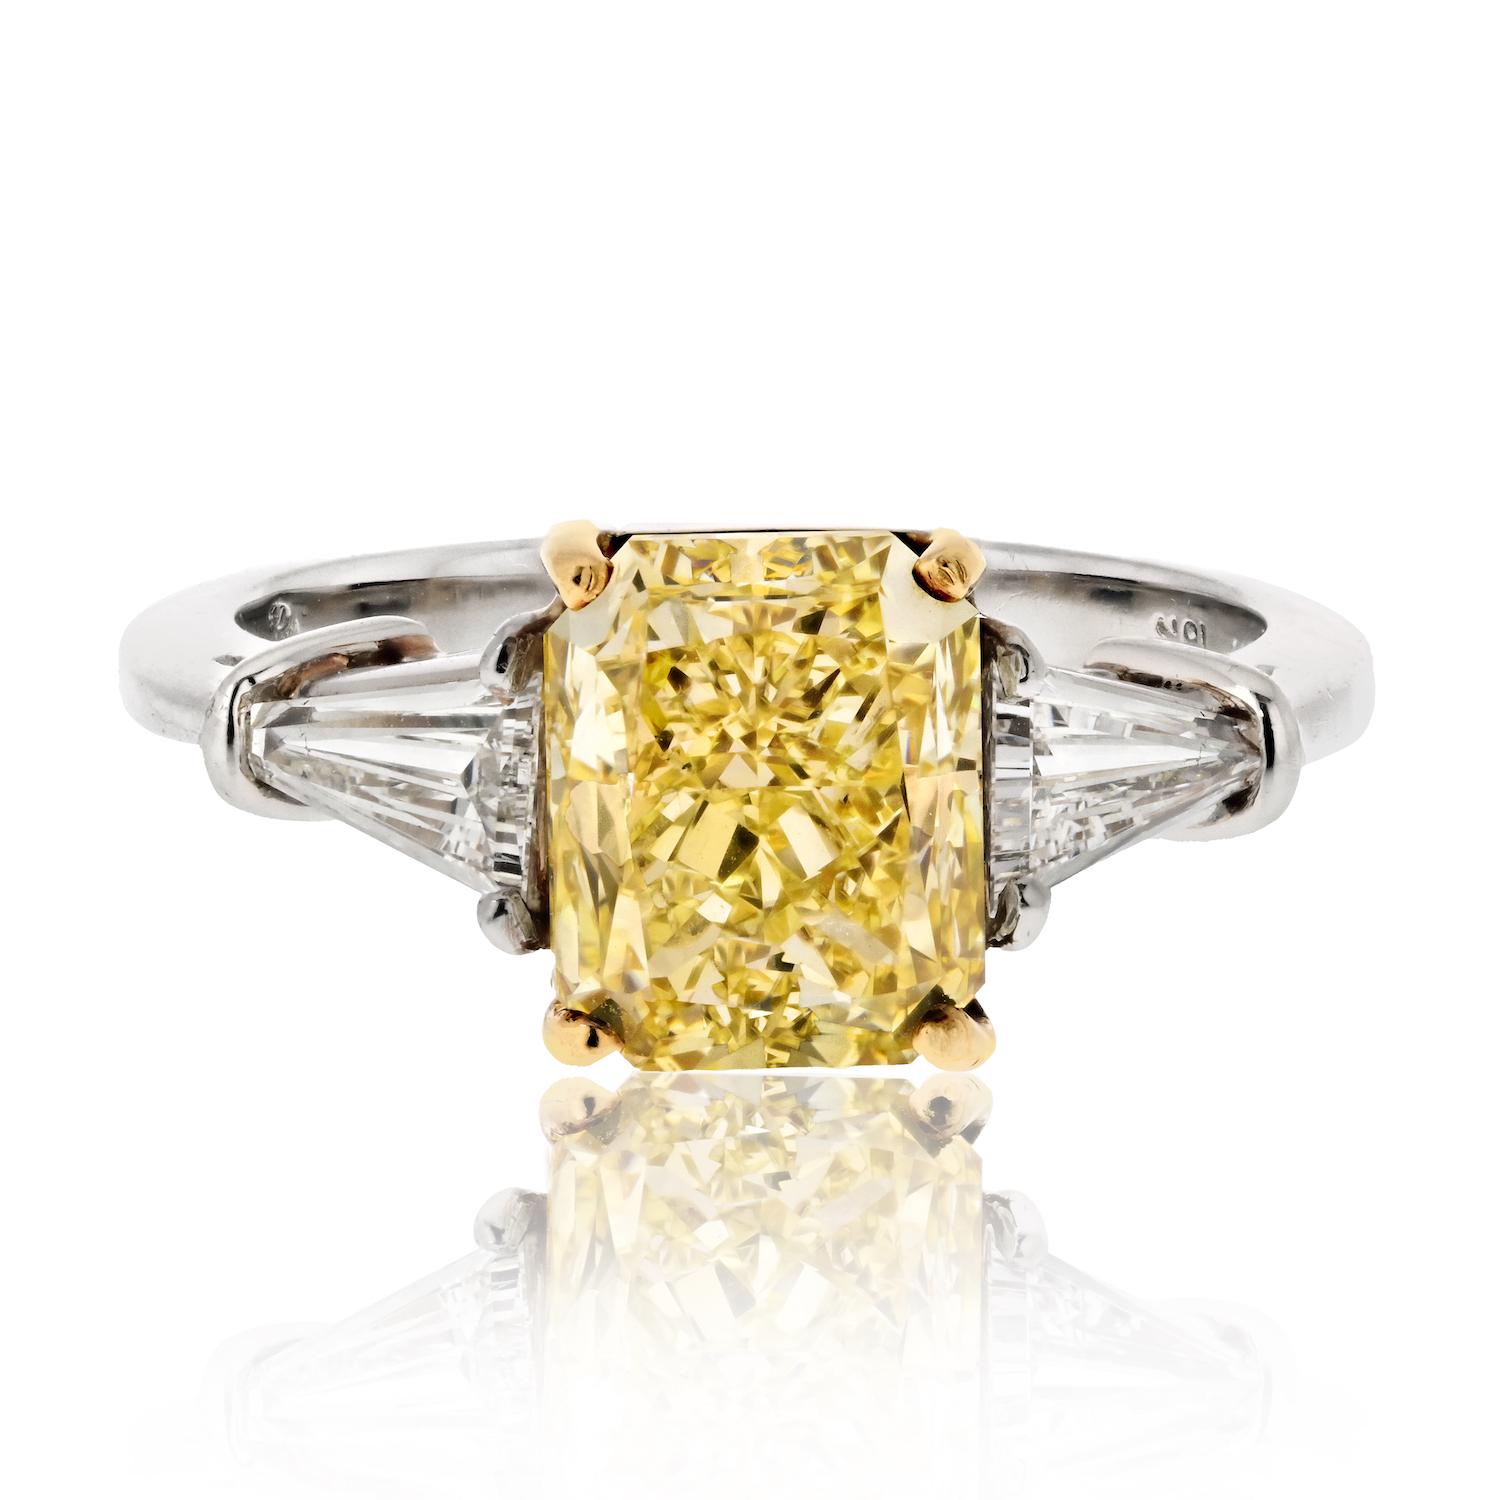 Embrace the extraordinary with this exquisite 3.08-carat Radiant Cut Diamond engagement ring—a dazzling celebration of love and brilliance. 

The center stage features a show-stopping Fancy Yellow diamond, certified by GIA with a remarkable VVS2